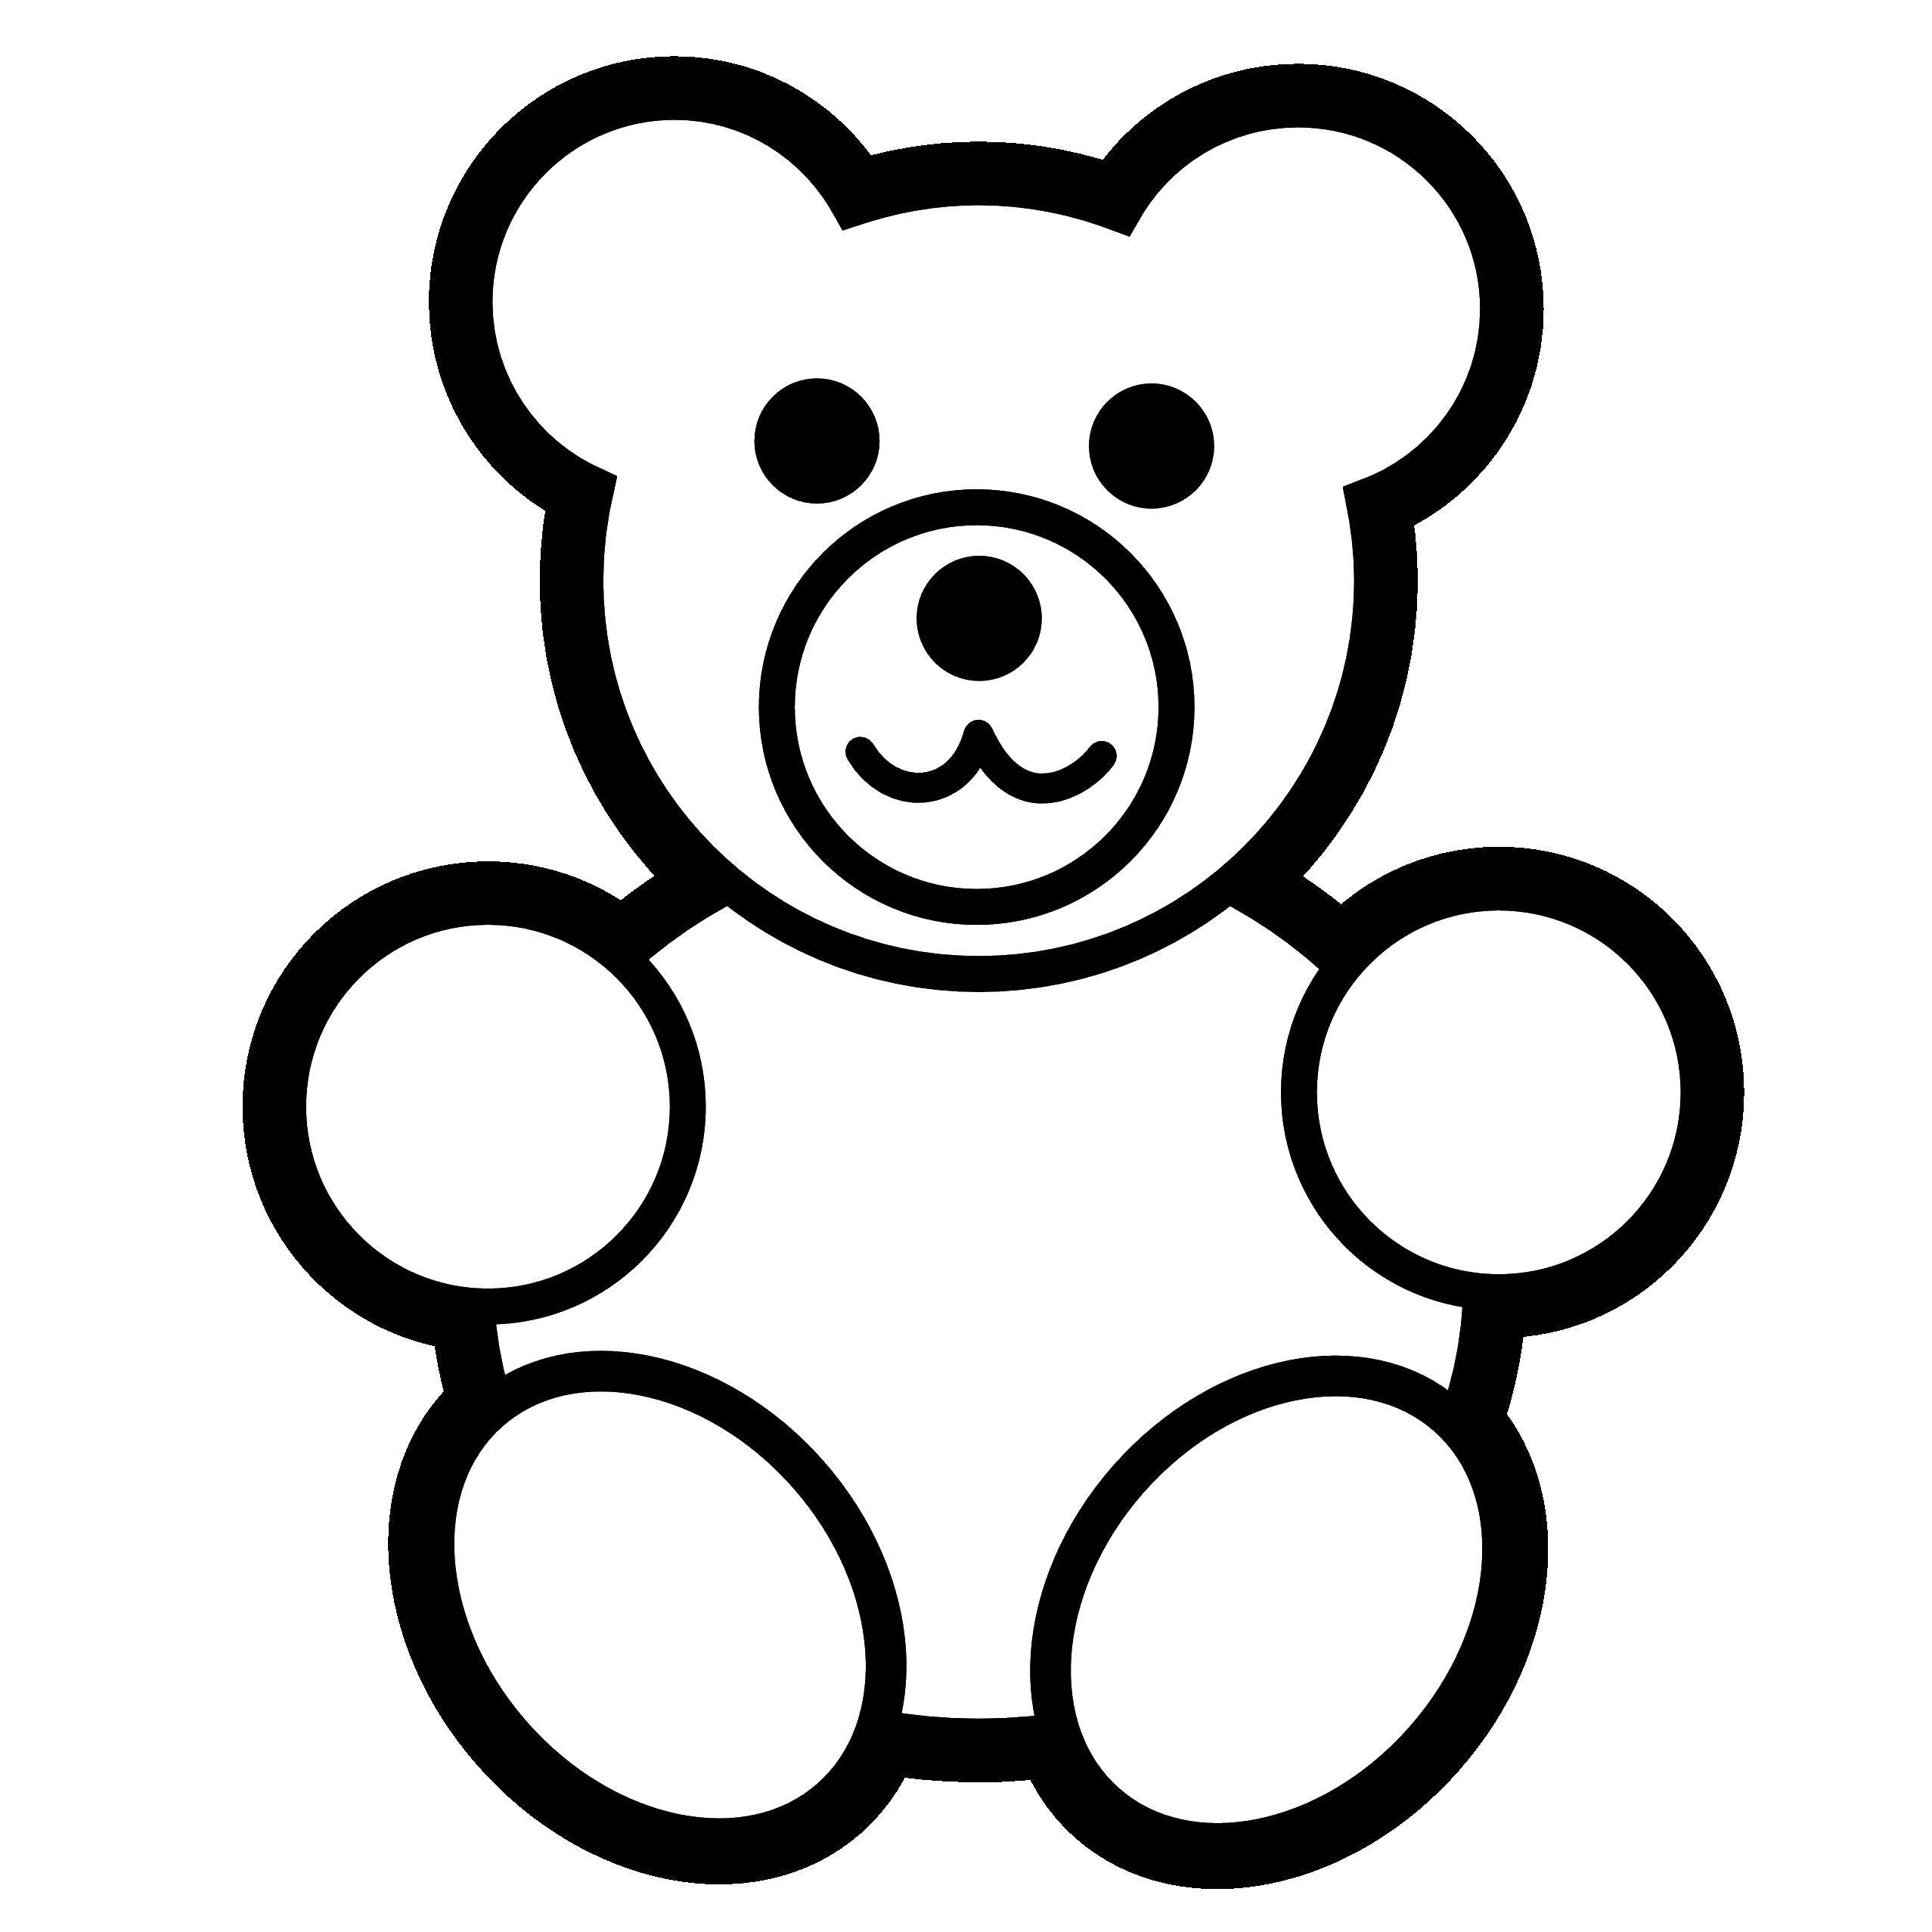 Coloring Toy bear. Category toys. Tags:  toy, bear, bow.